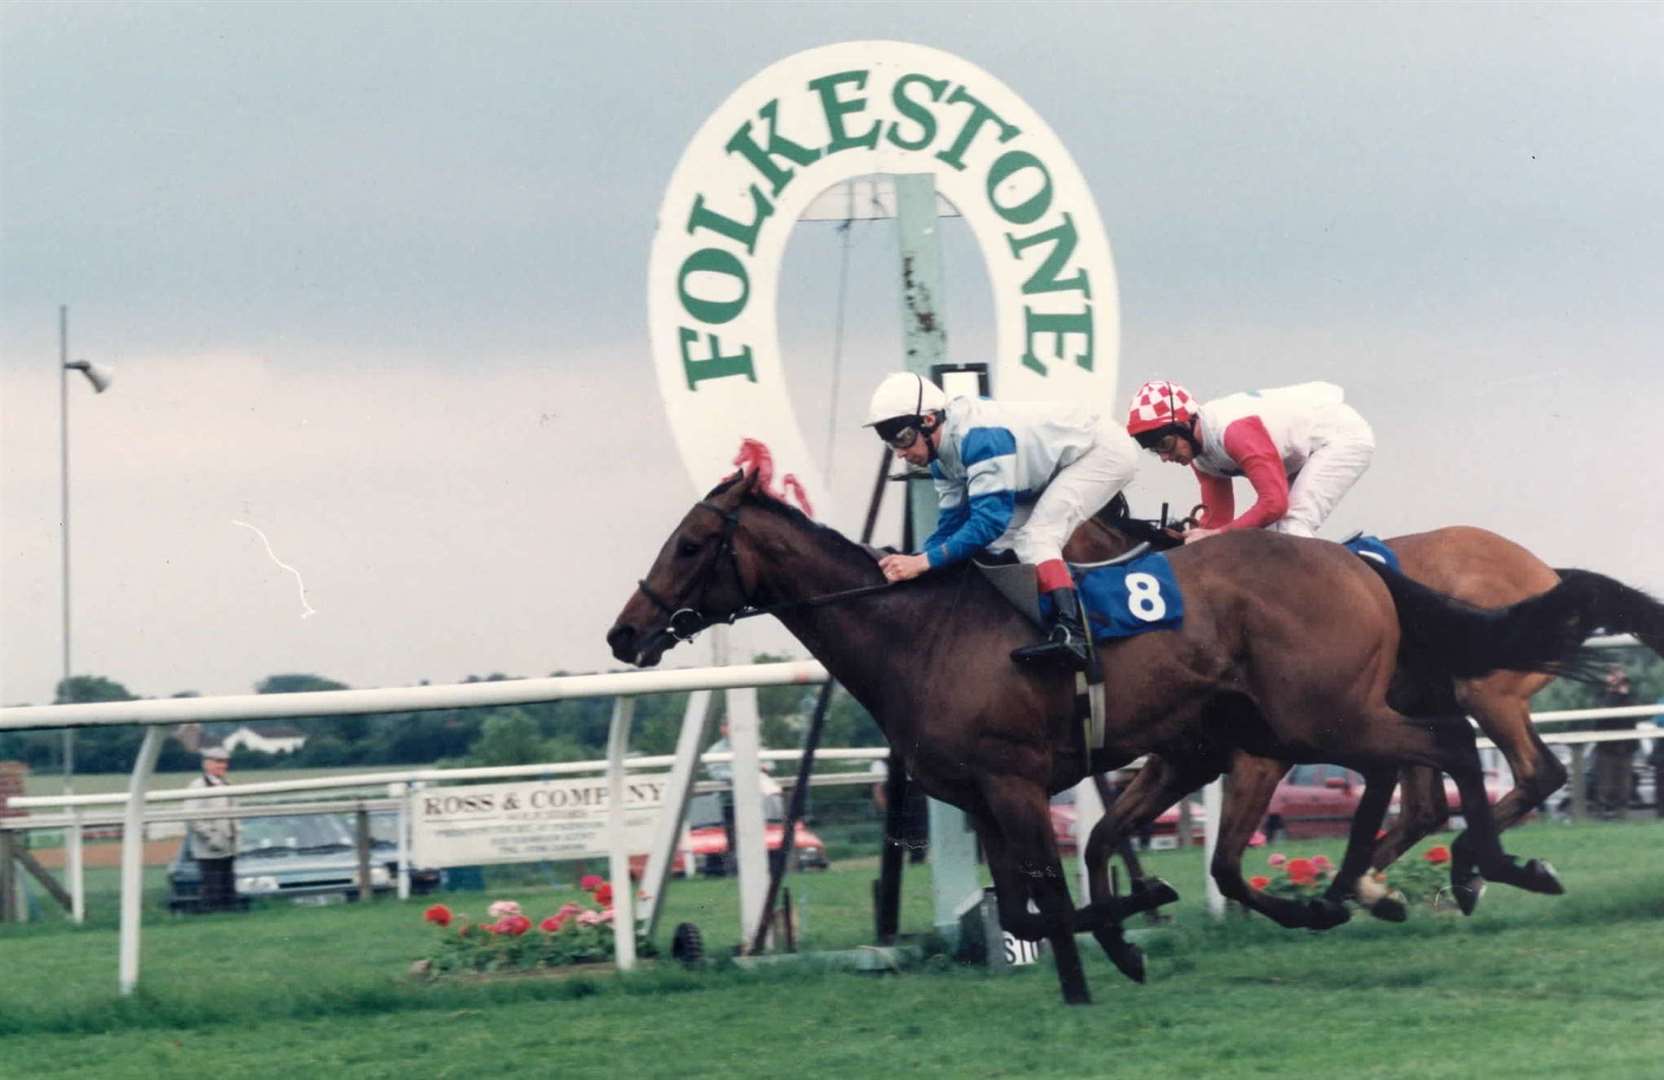 Action at Folkestone Racecourse in 1995